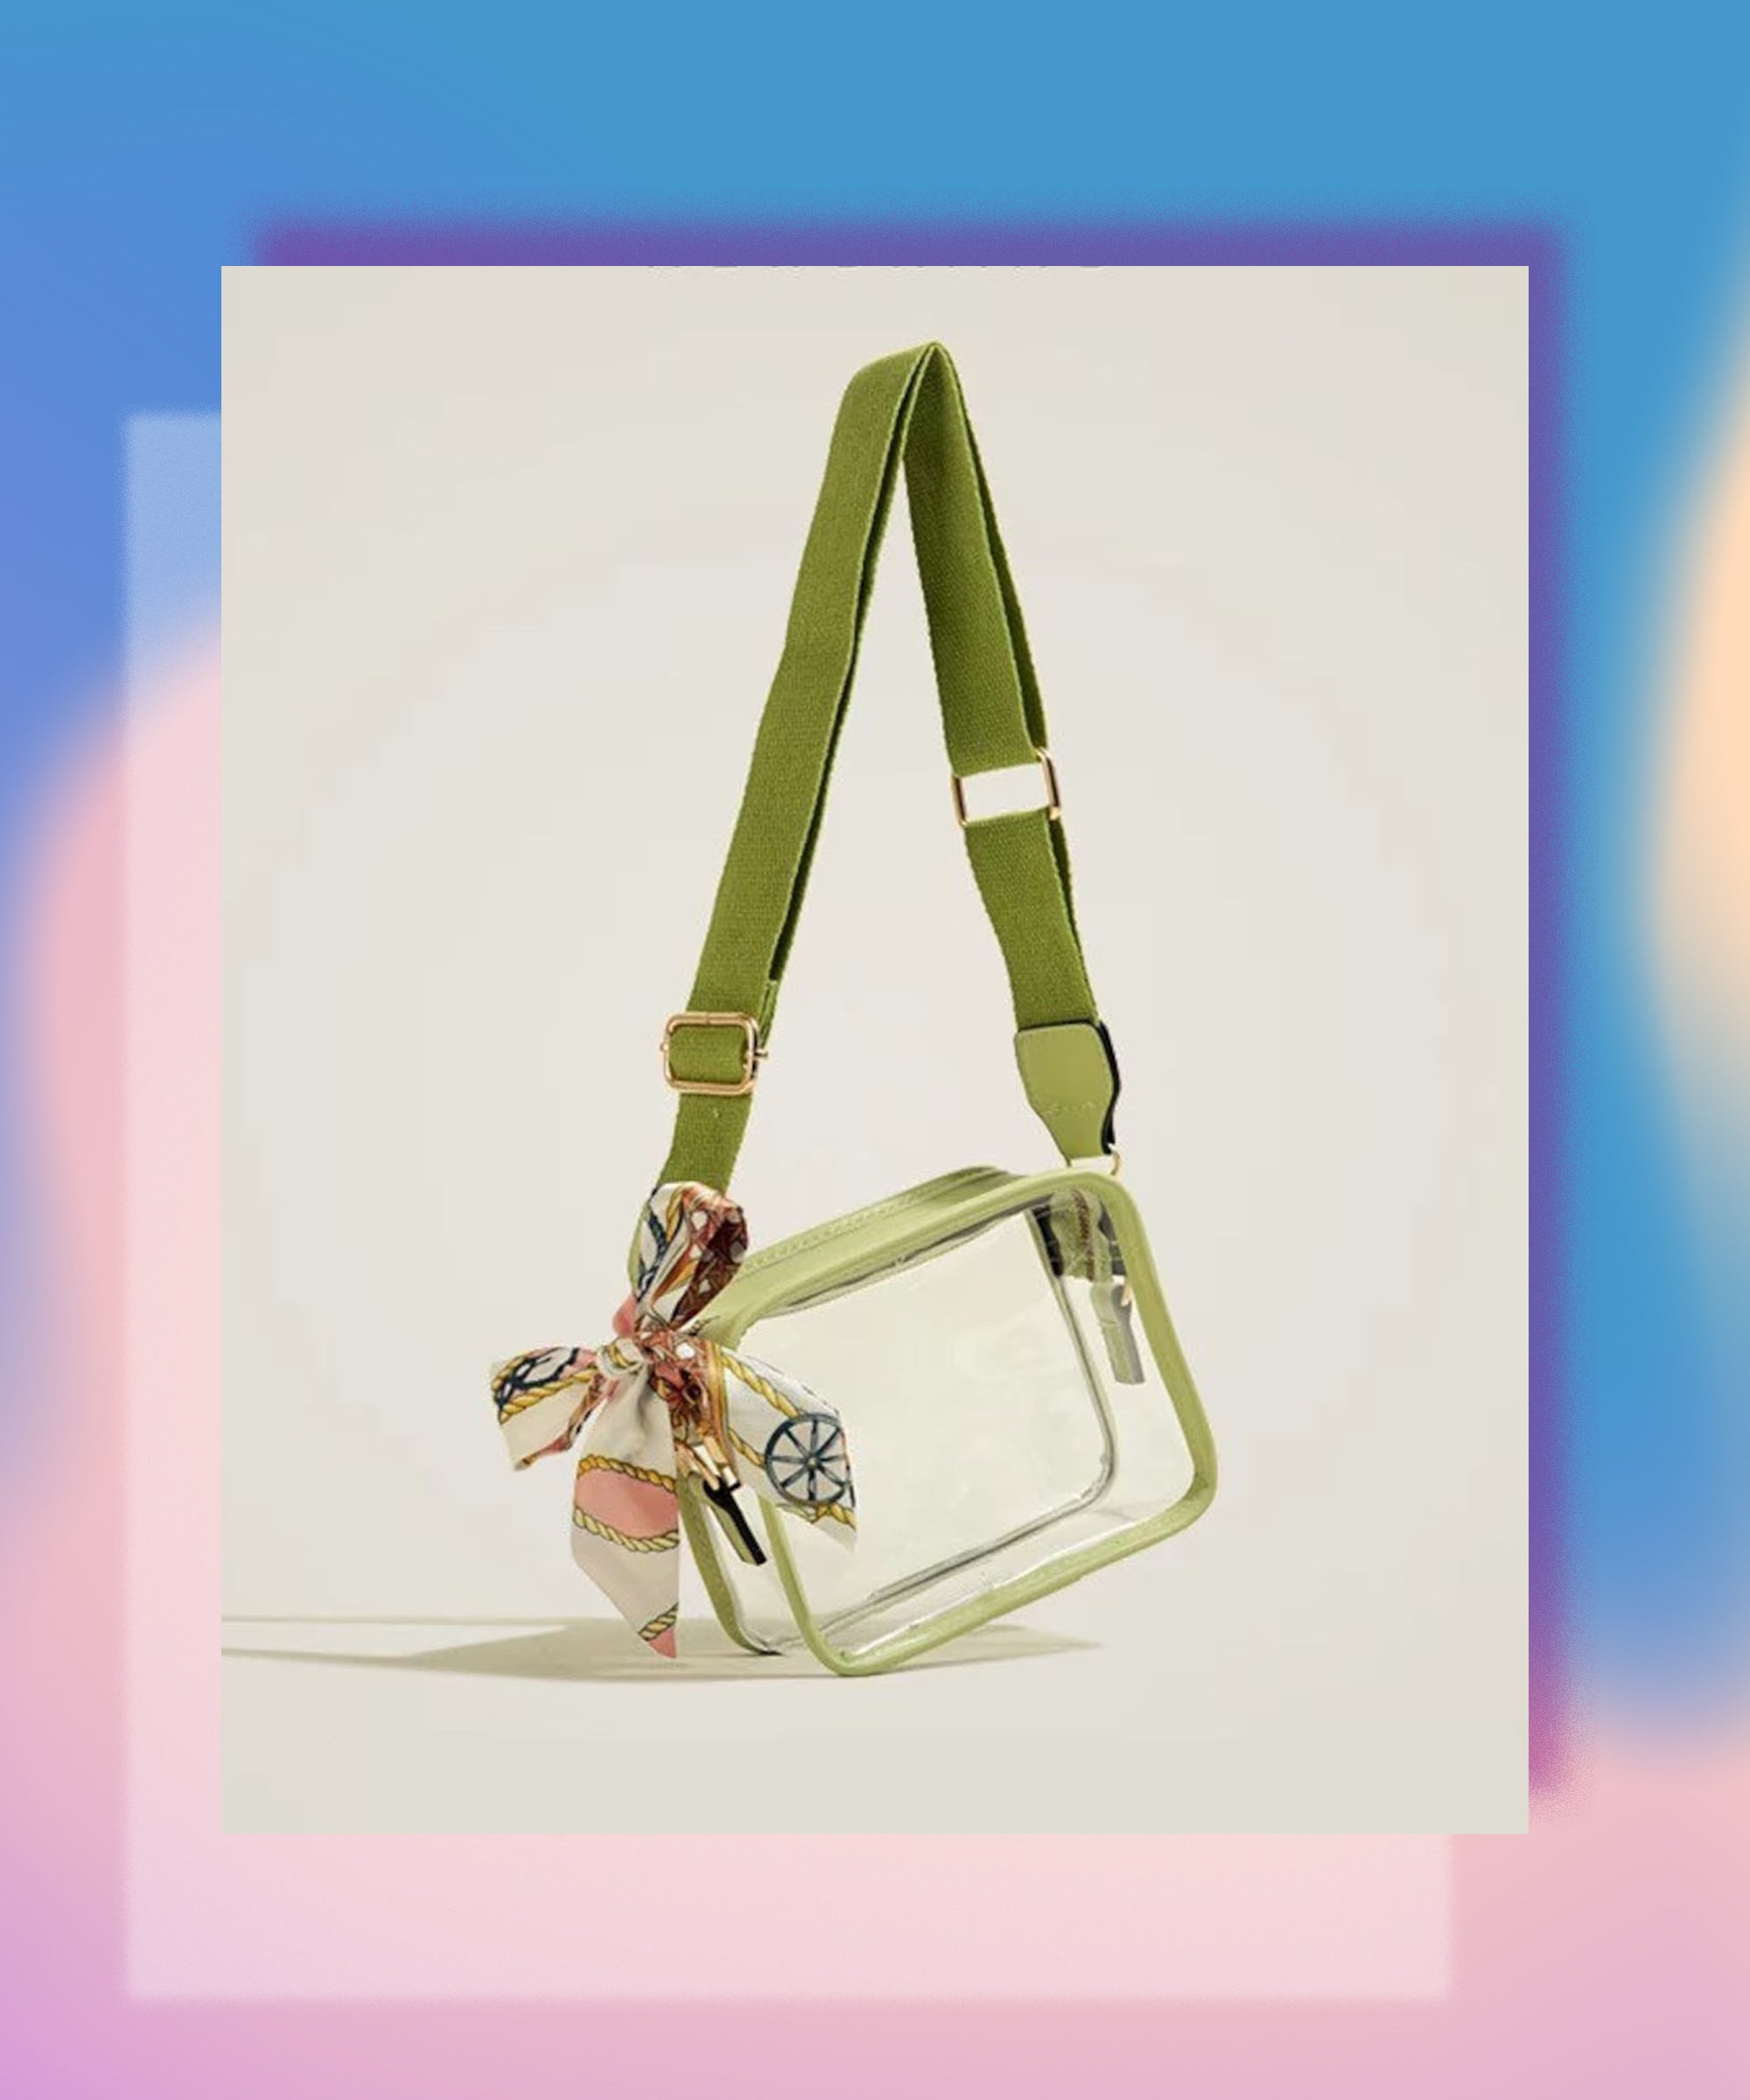 How to Rock Your Purses with EXTRA Straps!